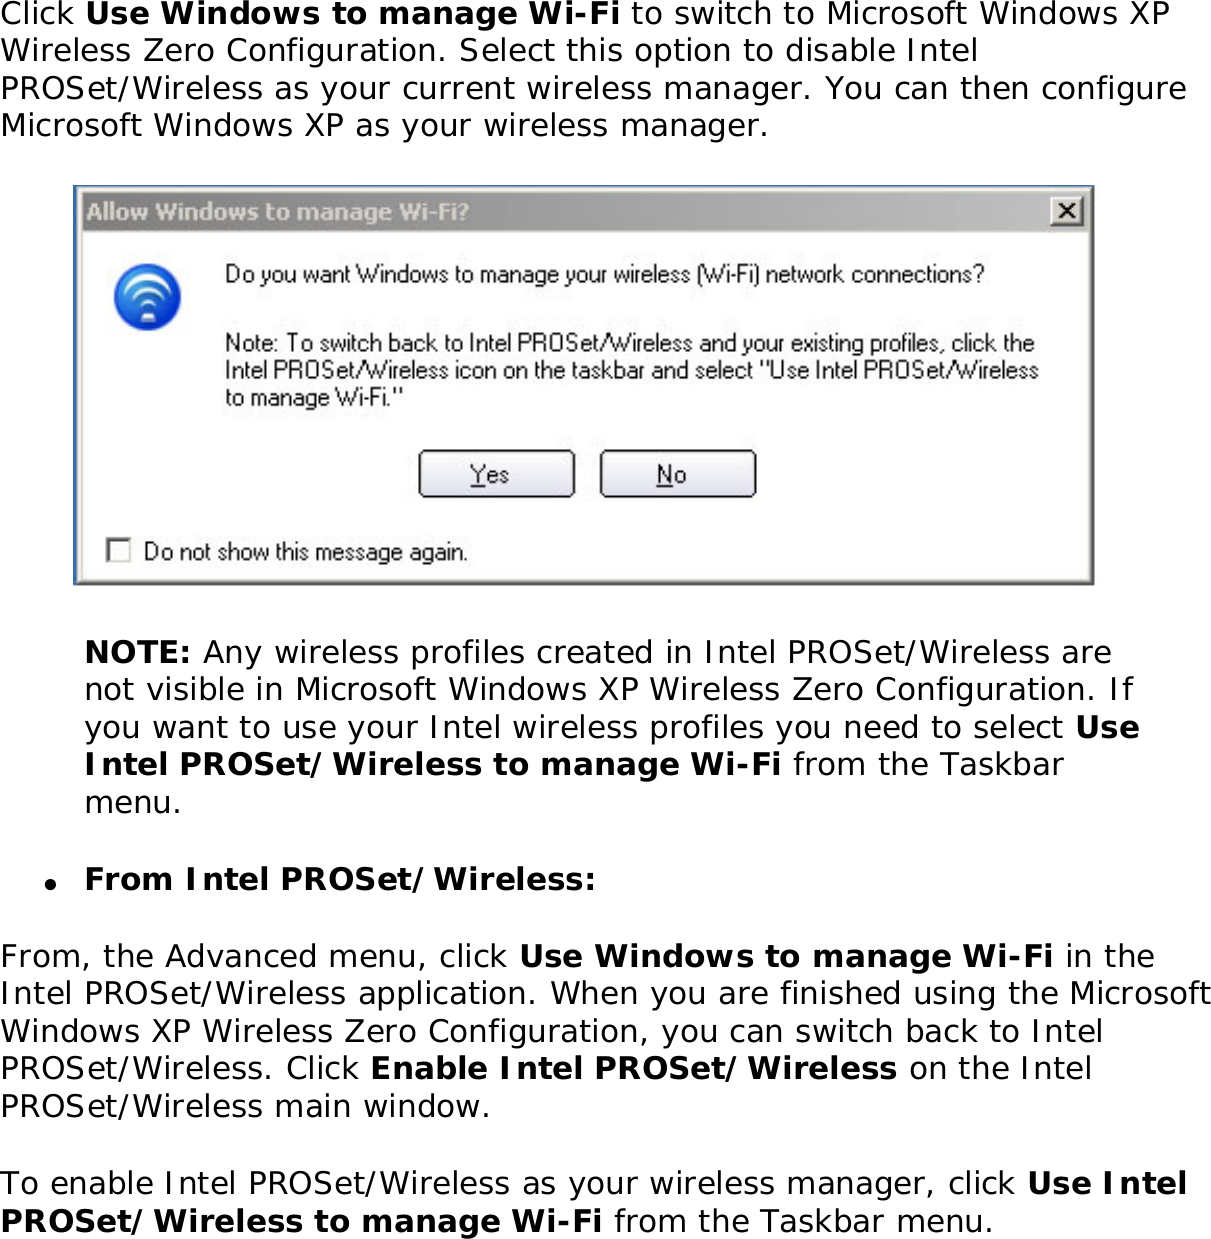 Click Use Windows to manage Wi-Fi to switch to Microsoft Windows XP Wireless Zero Configuration. Select this option to disable Intel PROSet/Wireless as your current wireless manager. You can then configure Microsoft Windows XP as your wireless manager.  NOTE: Any wireless profiles created in Intel PROSet/Wireless are not visible in Microsoft Windows XP Wireless Zero Configuration. If you want to use your Intel wireless profiles you need to select Use Intel PROSet/Wireless to manage Wi-Fi from the Taskbar menu. ●     From Intel PROSet/Wireless: From, the Advanced menu, click Use Windows to manage Wi-Fi in the Intel PROSet/Wireless application. When you are finished using the Microsoft Windows XP Wireless Zero Configuration, you can switch back to Intel PROSet/Wireless. Click Enable Intel PROSet/Wireless on the Intel PROSet/Wireless main window. To enable Intel PROSet/Wireless as your wireless manager, click Use Intel PROSet/Wireless to manage Wi-Fi from the Taskbar menu. 